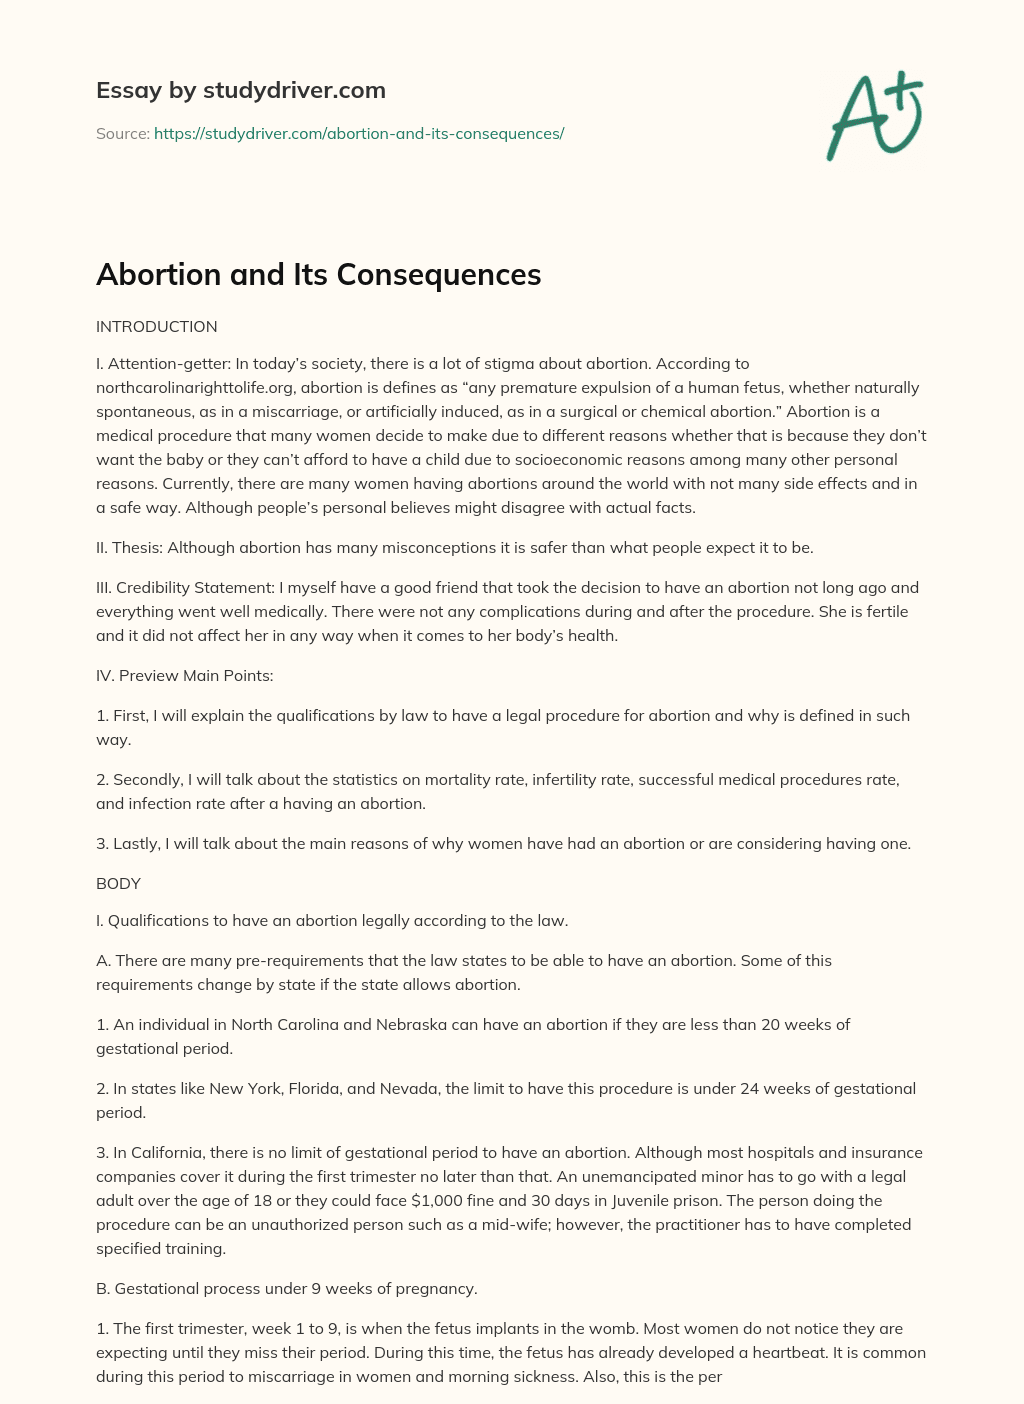 Abortion and its Consequences essay